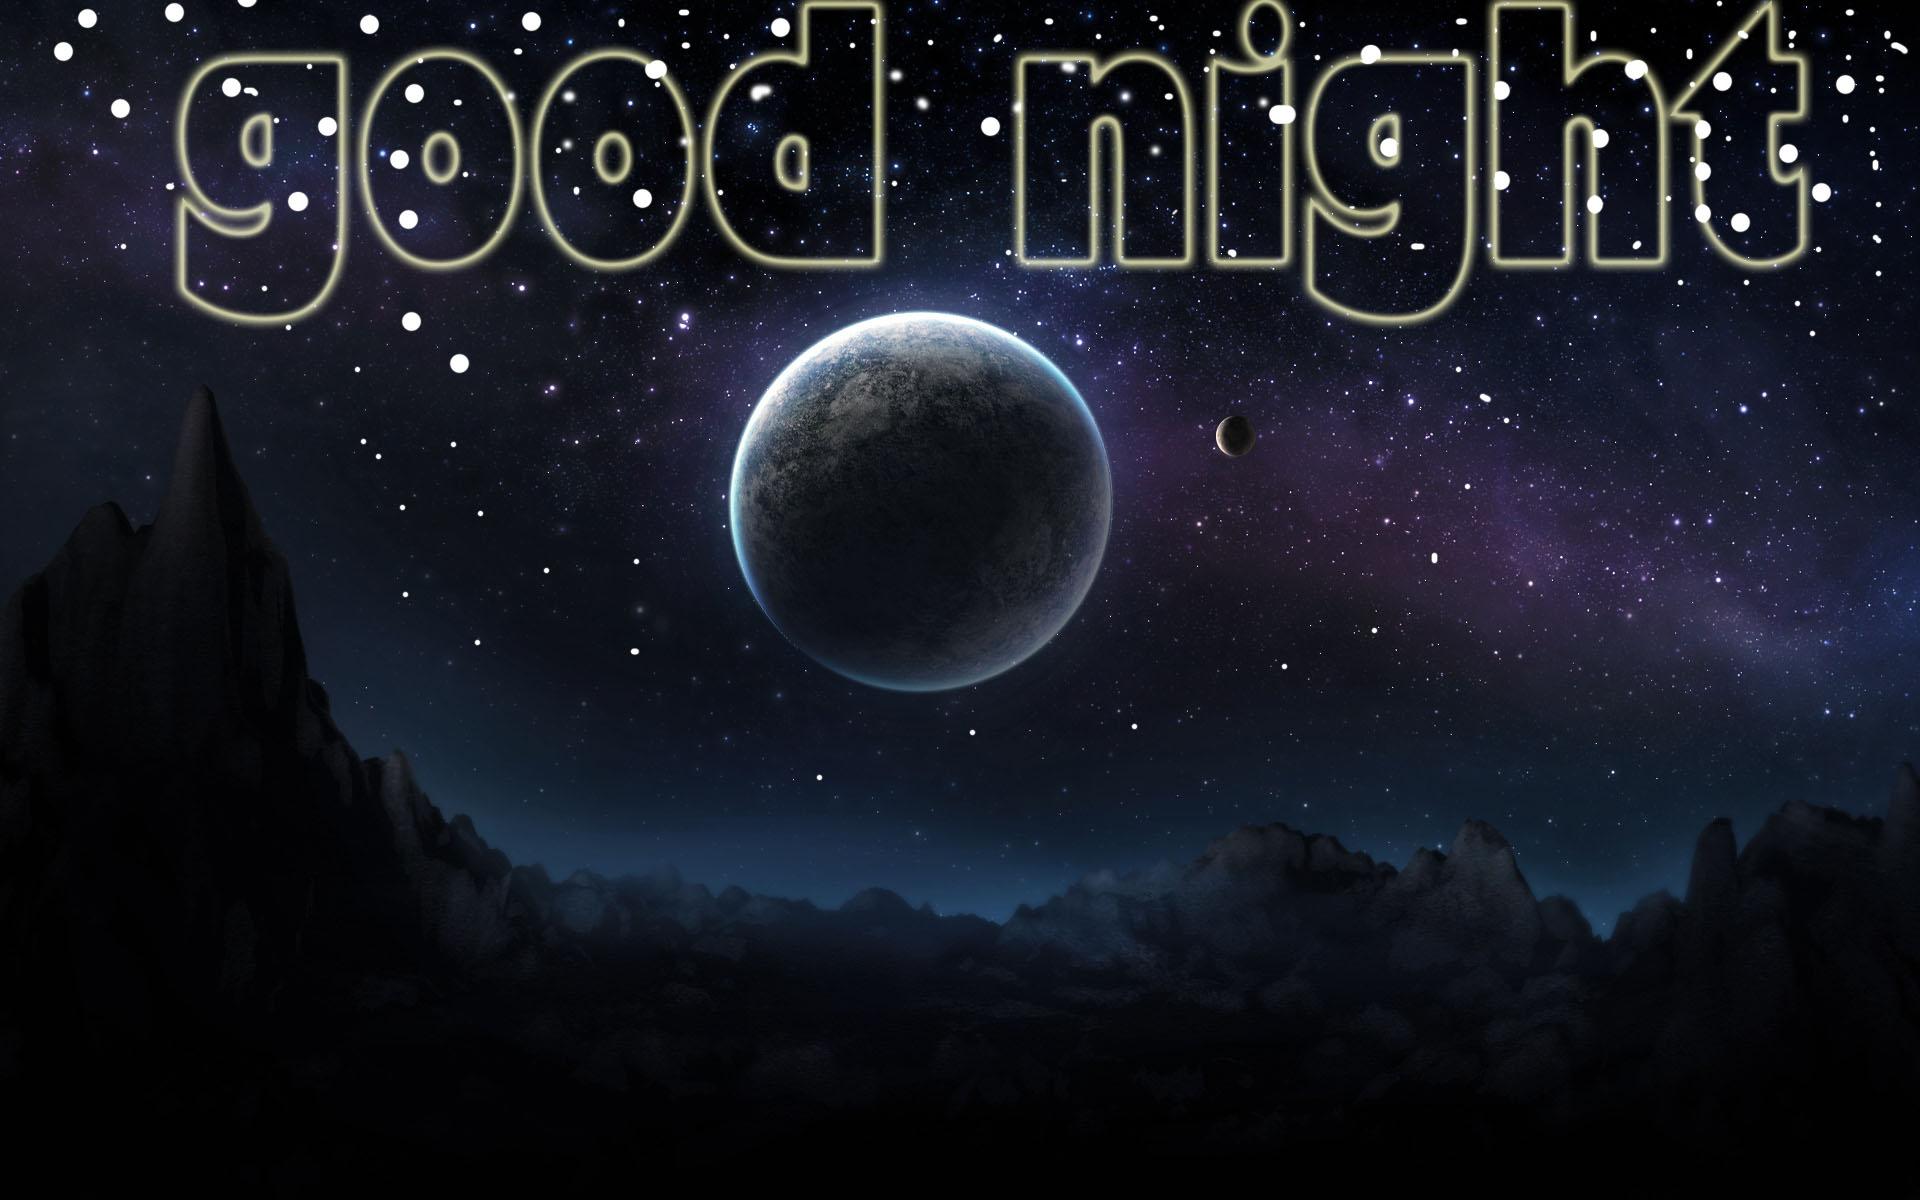 Good Night Image & 3D GIF For Whatsapp & Facebook